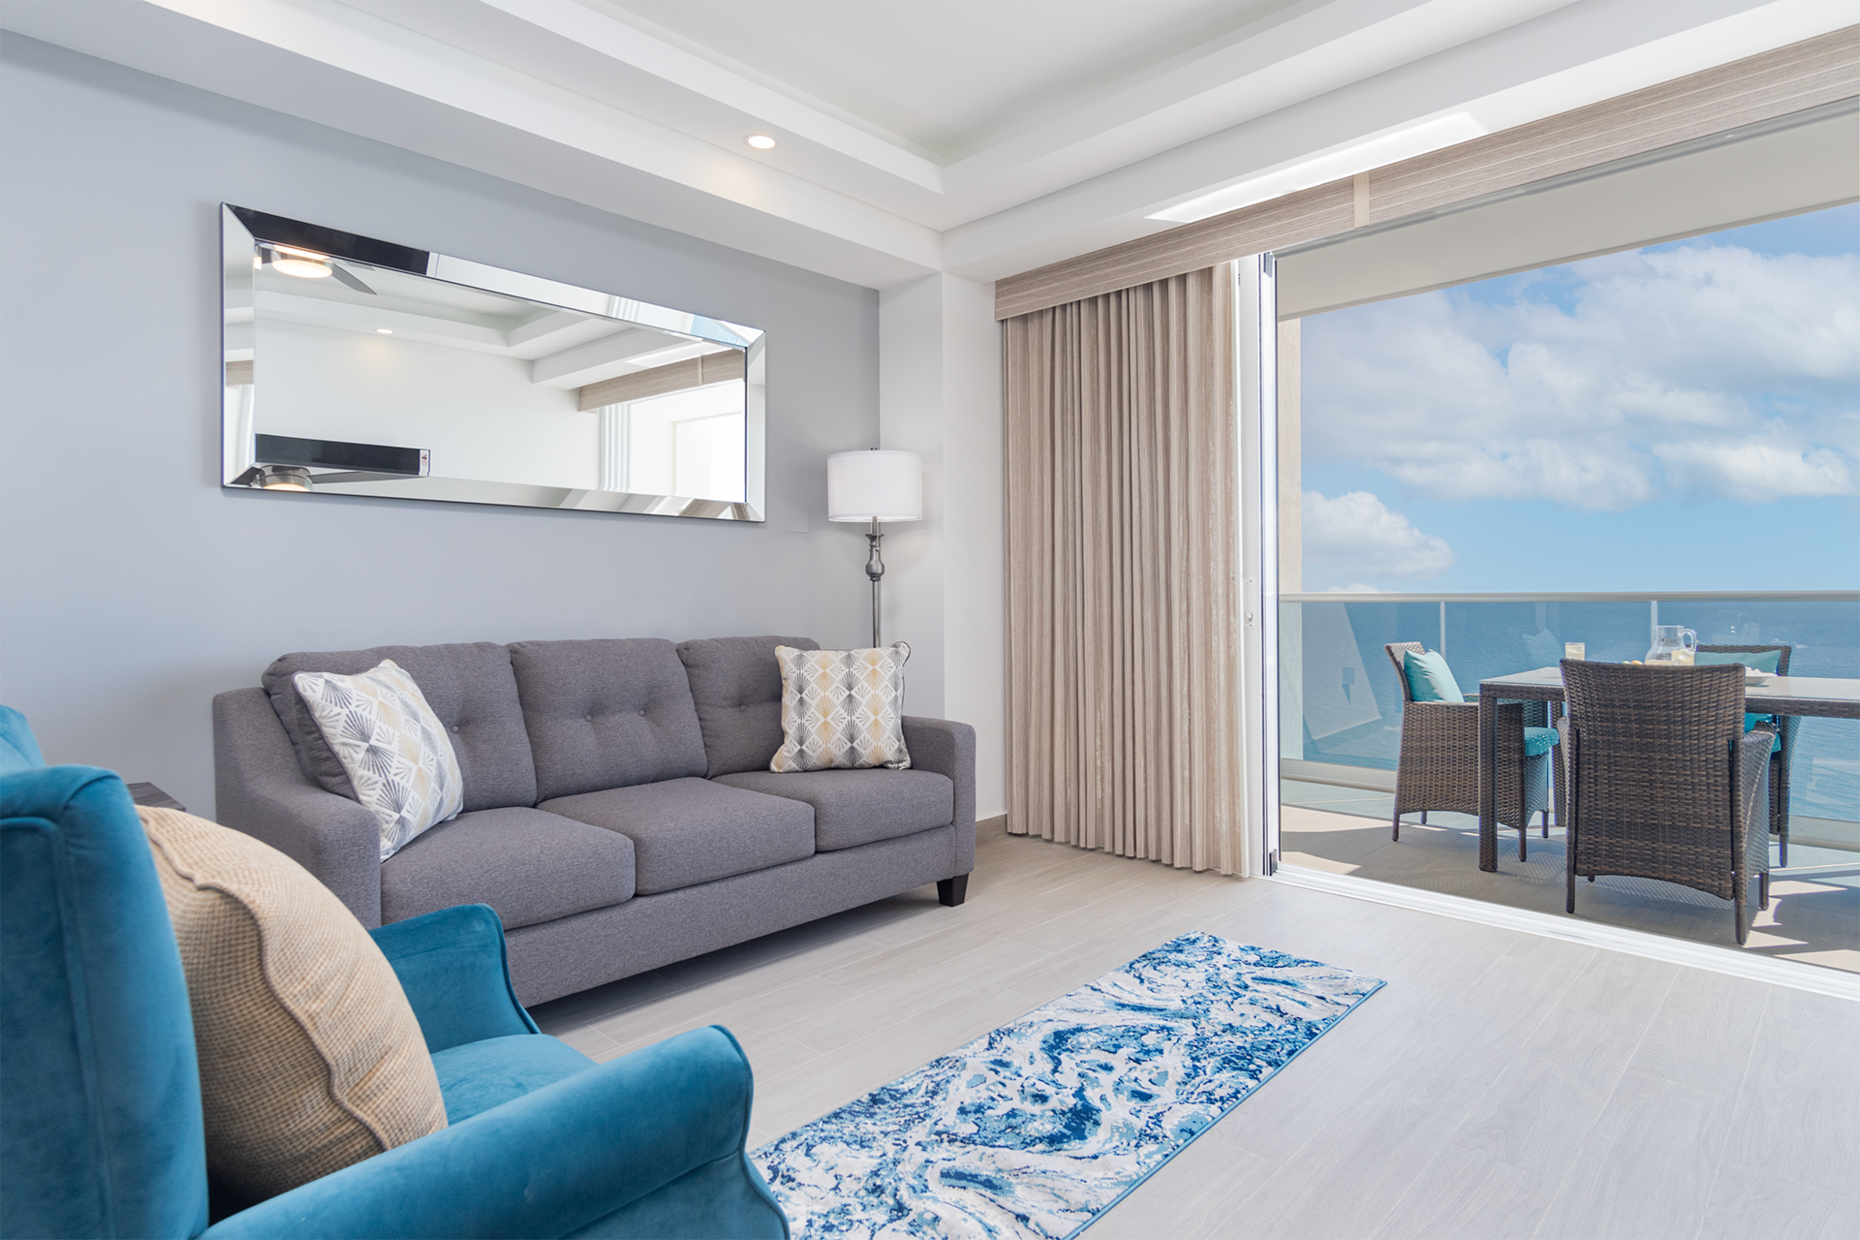 Exceptional views, exceptional comfort in the living room.